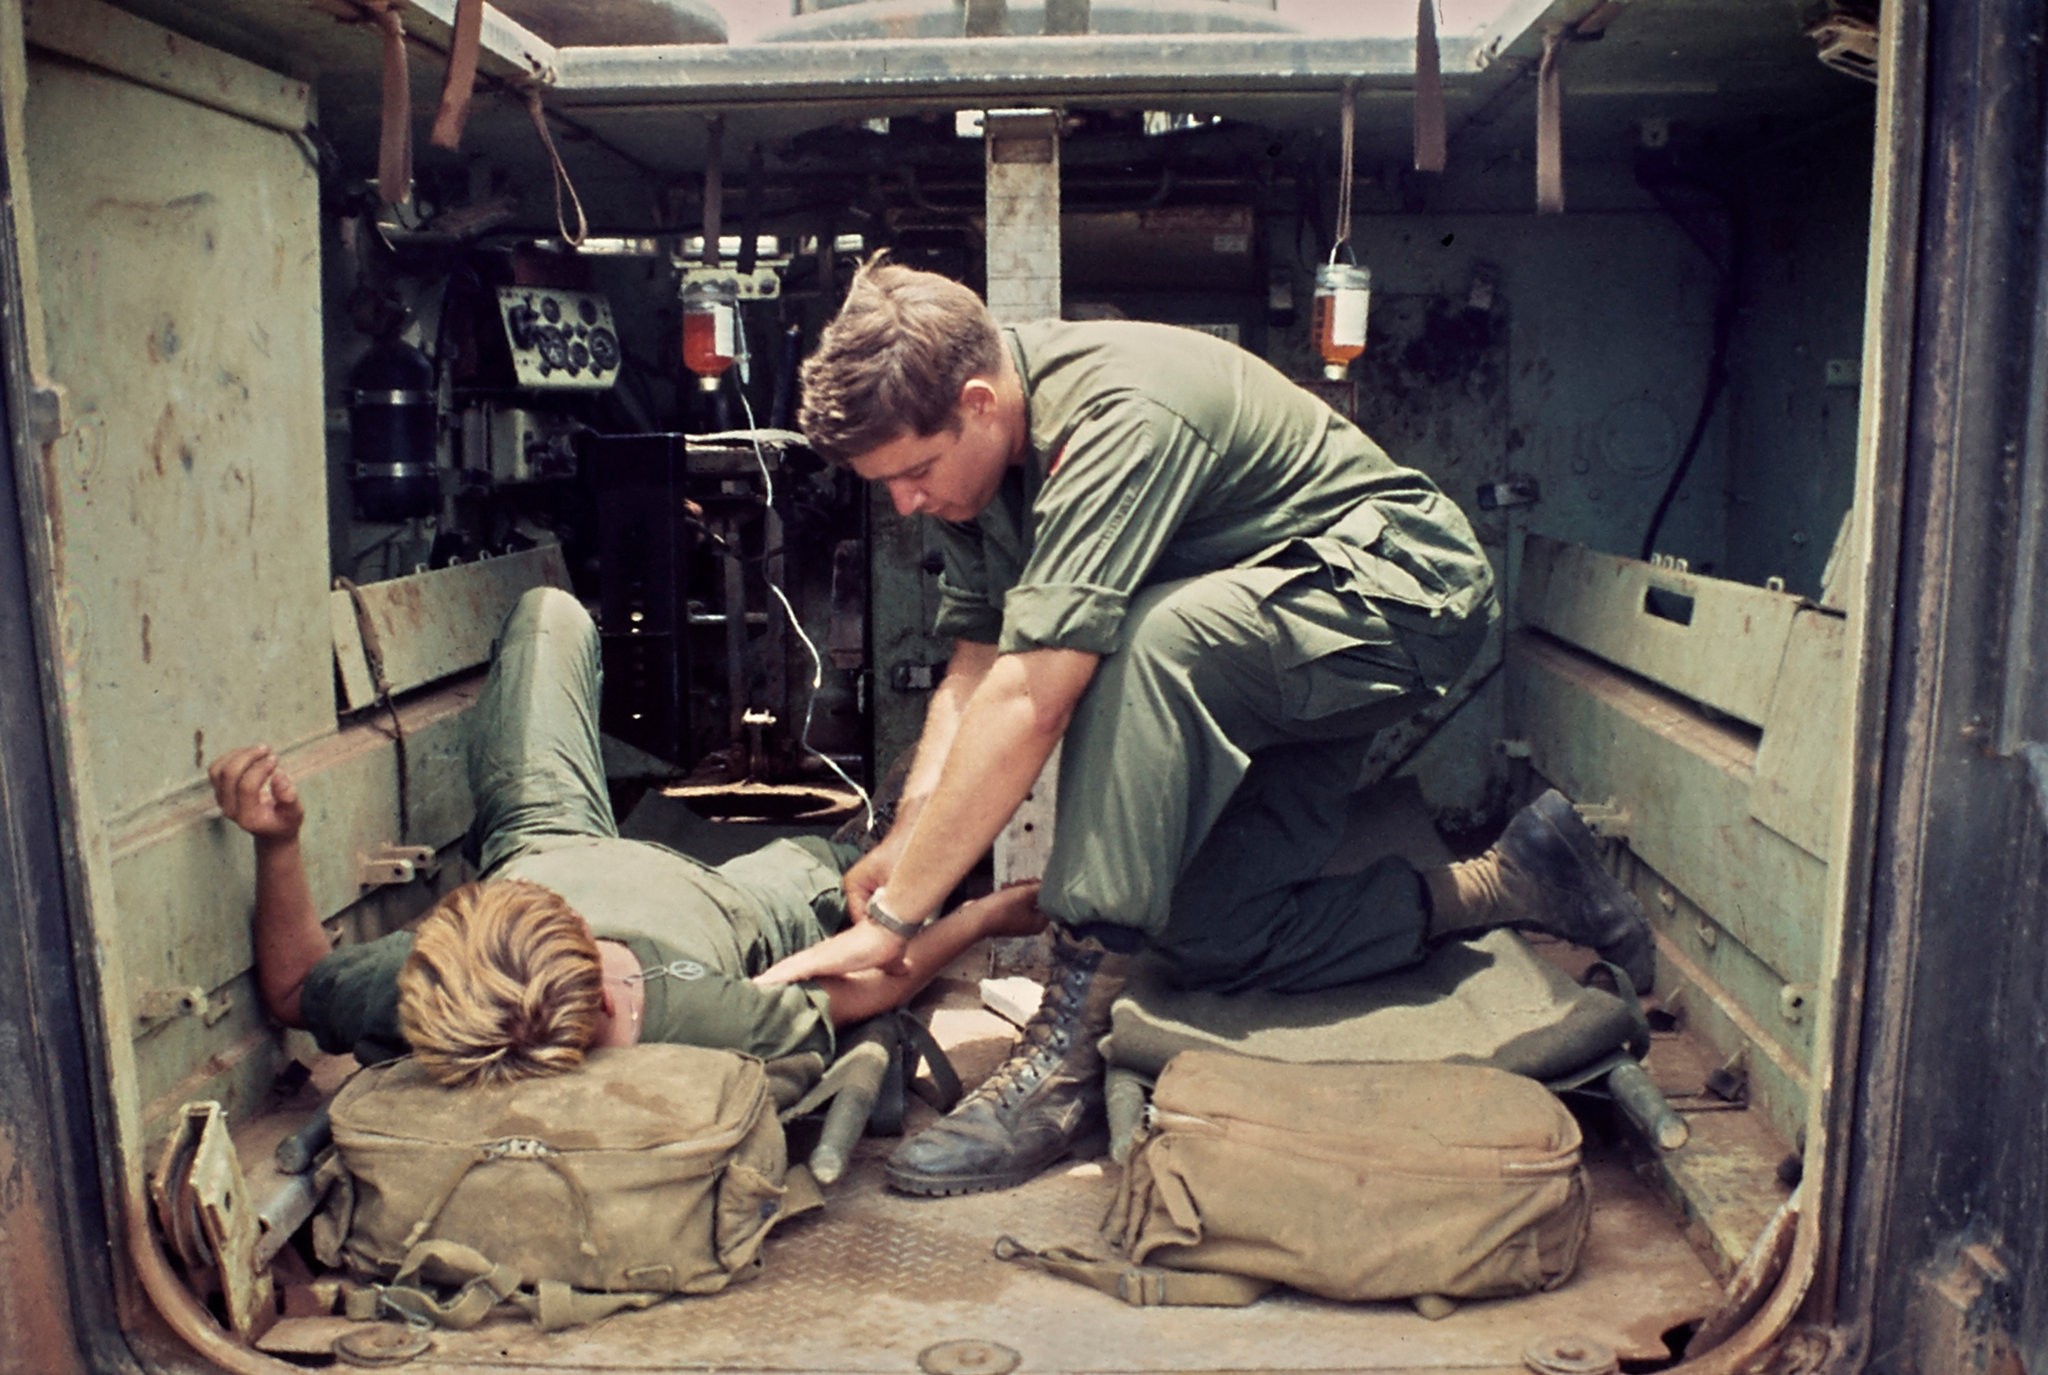 A medic area designed by Food Machinery Corporation. July 28, 1969